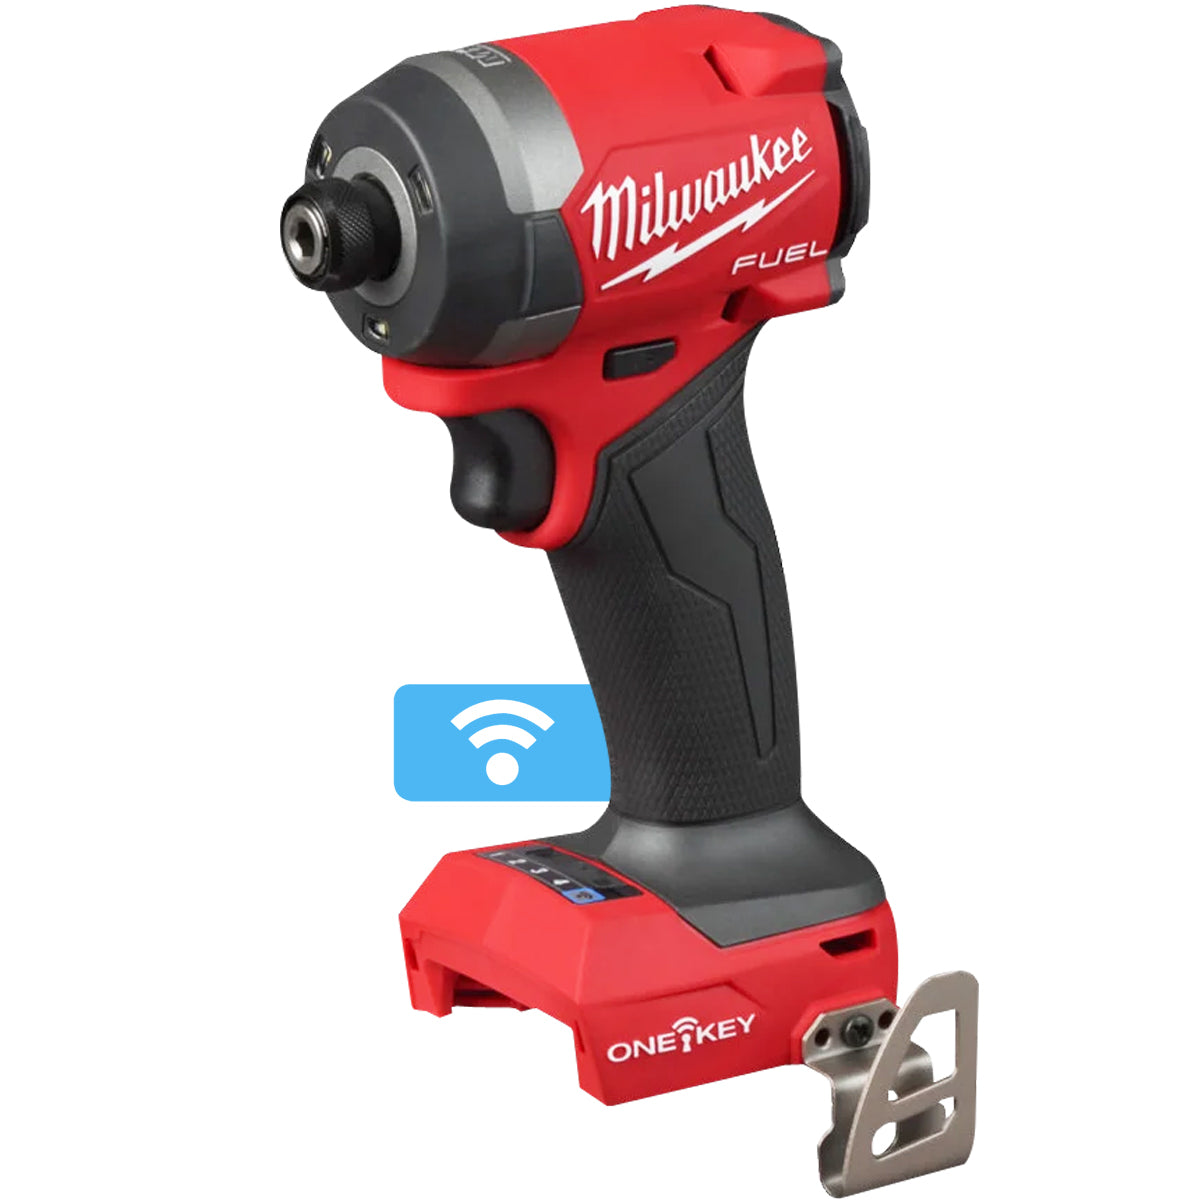 Milwaukee M18ONEID3-0 18V FUEL ONE-KEY Brushless Impact Driver Body Only